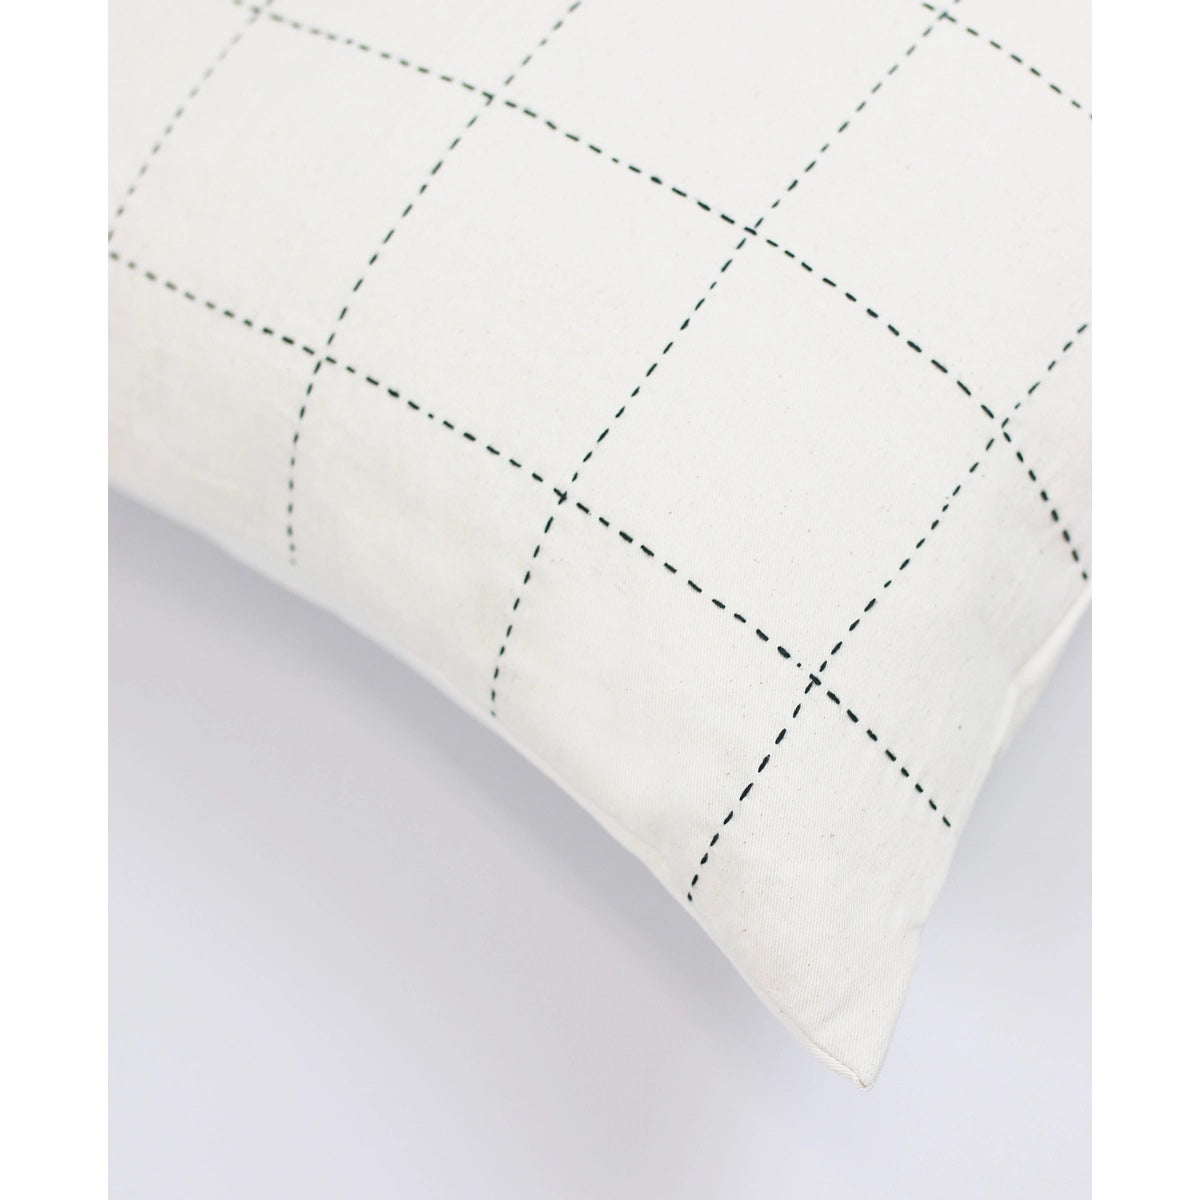 22" square hand-embroidered organic cotton pillow filled with goose down and duck feather shown in bone white with black stitching